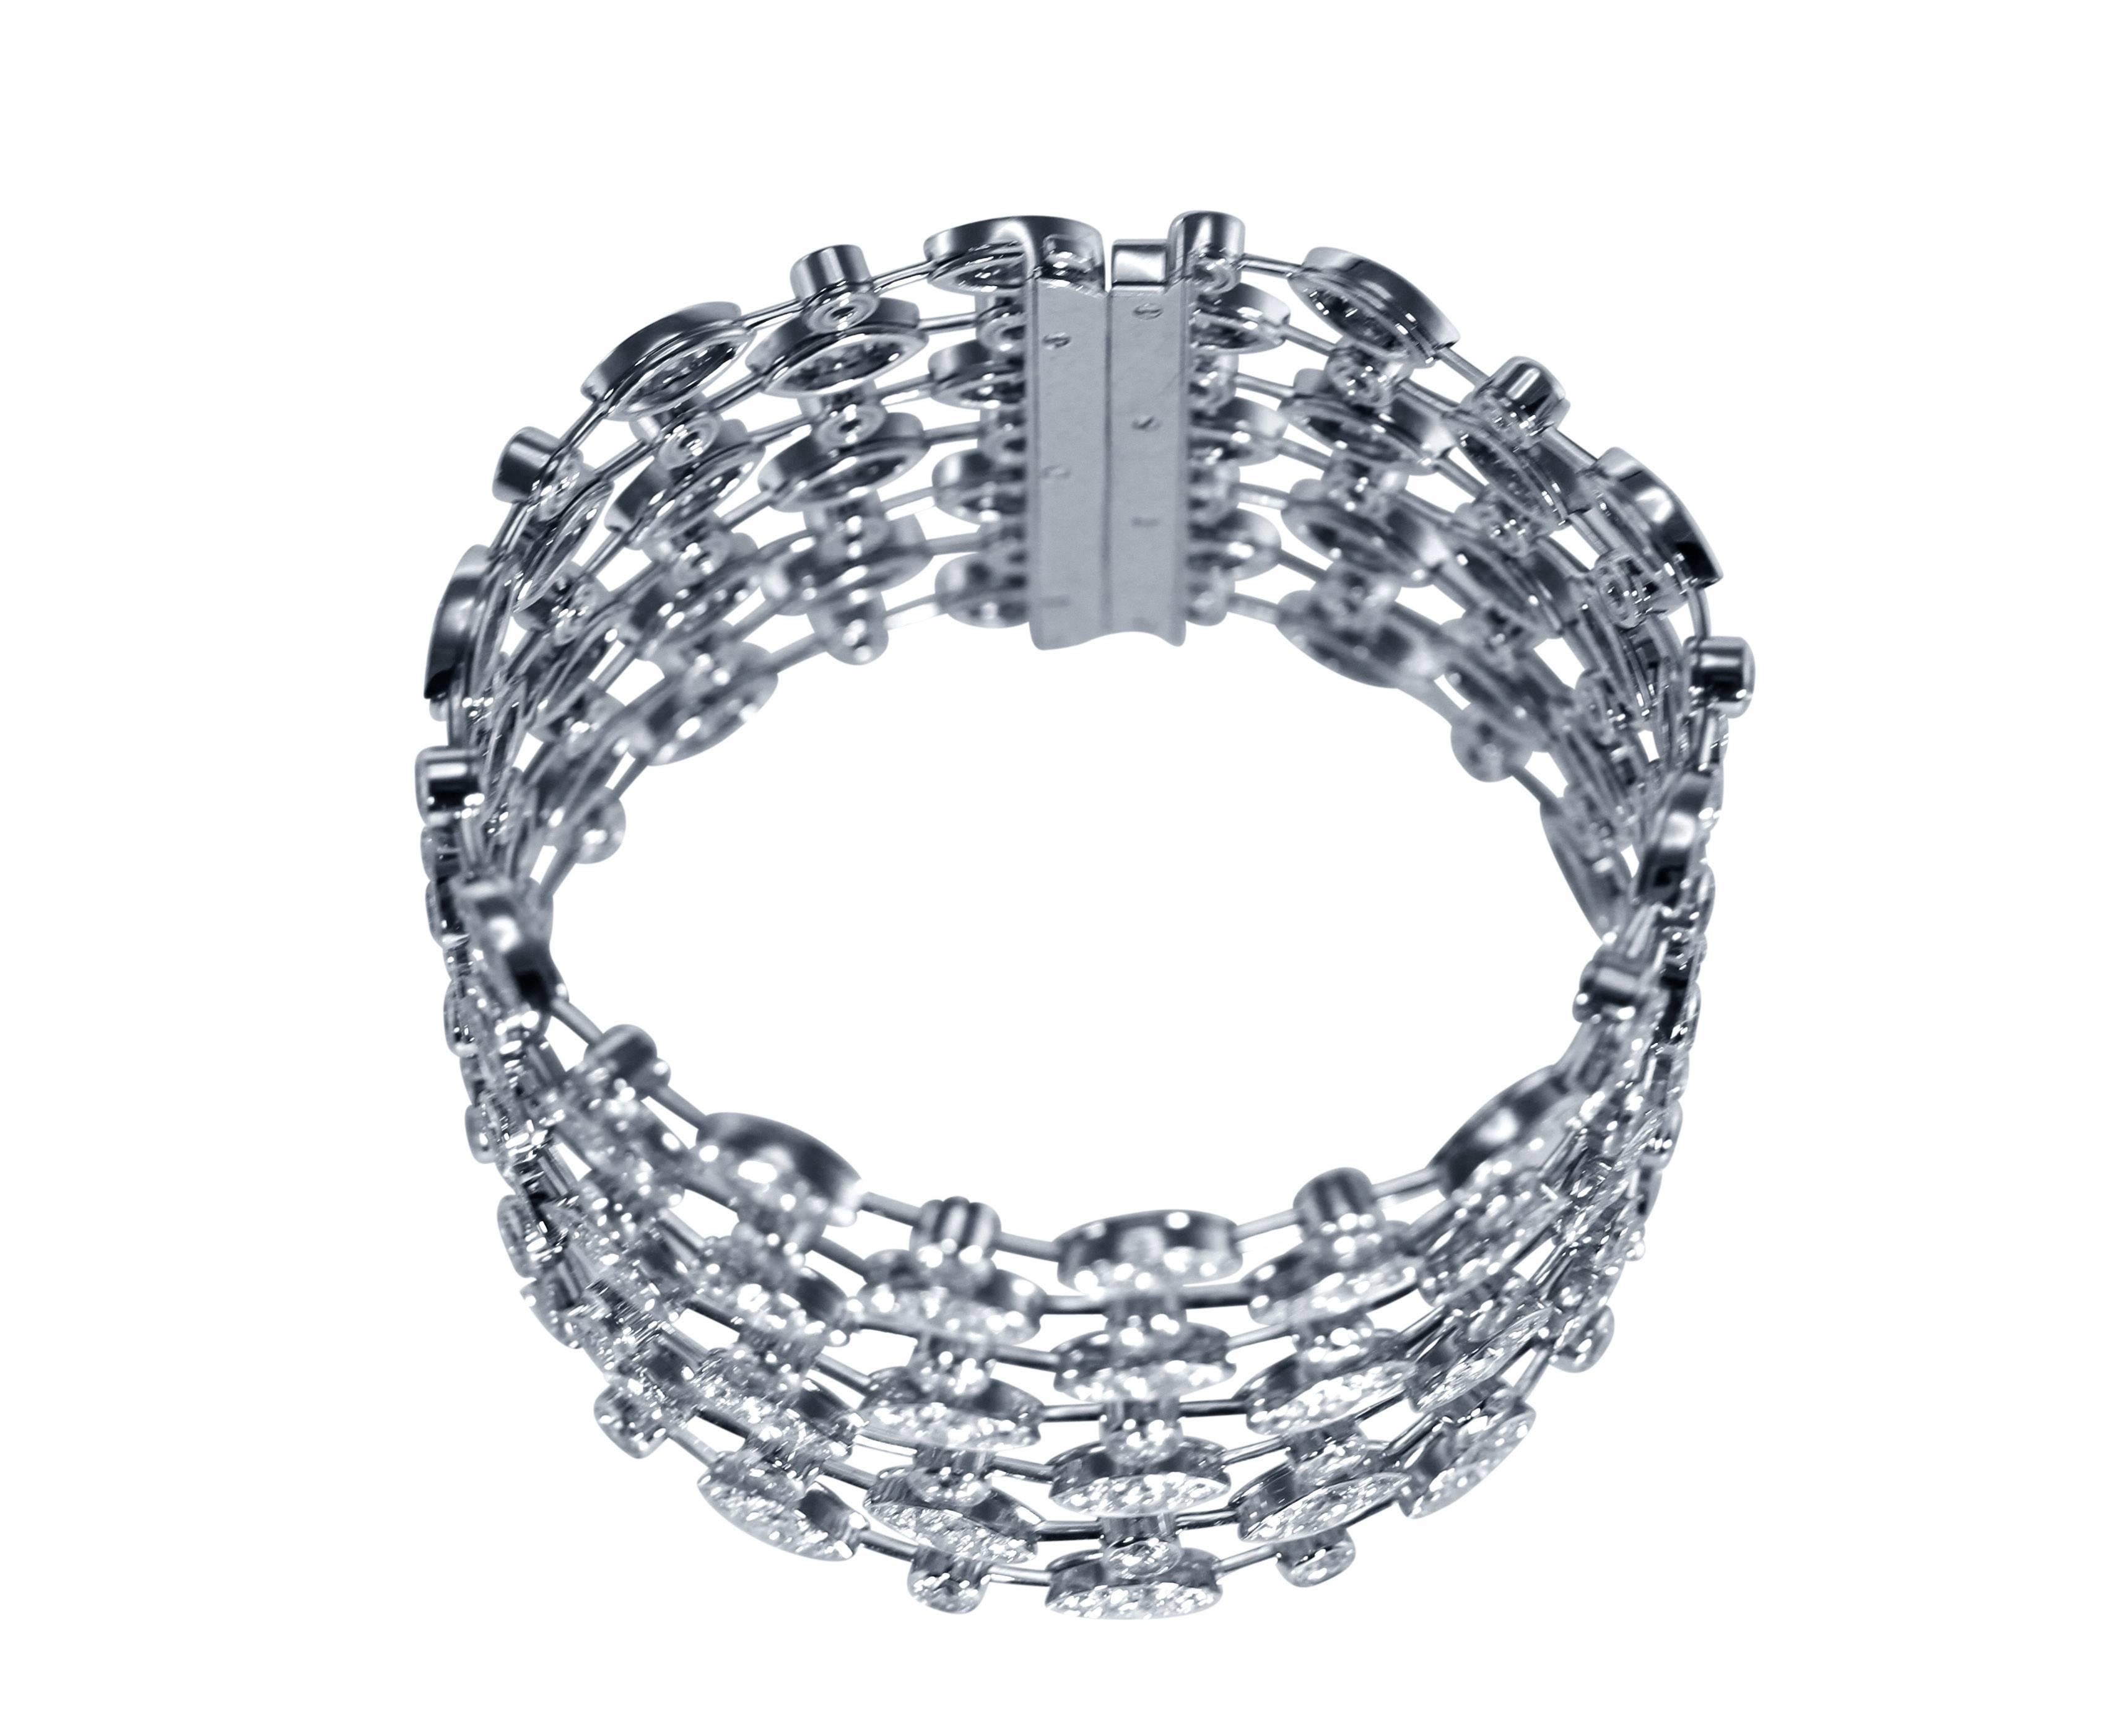 An 18 karat white gold and diamond strap bracelet by Cartier, France, designed as a series of round and lozenge-shaped links connected by knife-edge links, set throughout with 280 round diamonds weighing approximately 30.00 carats, length 7 inches, 